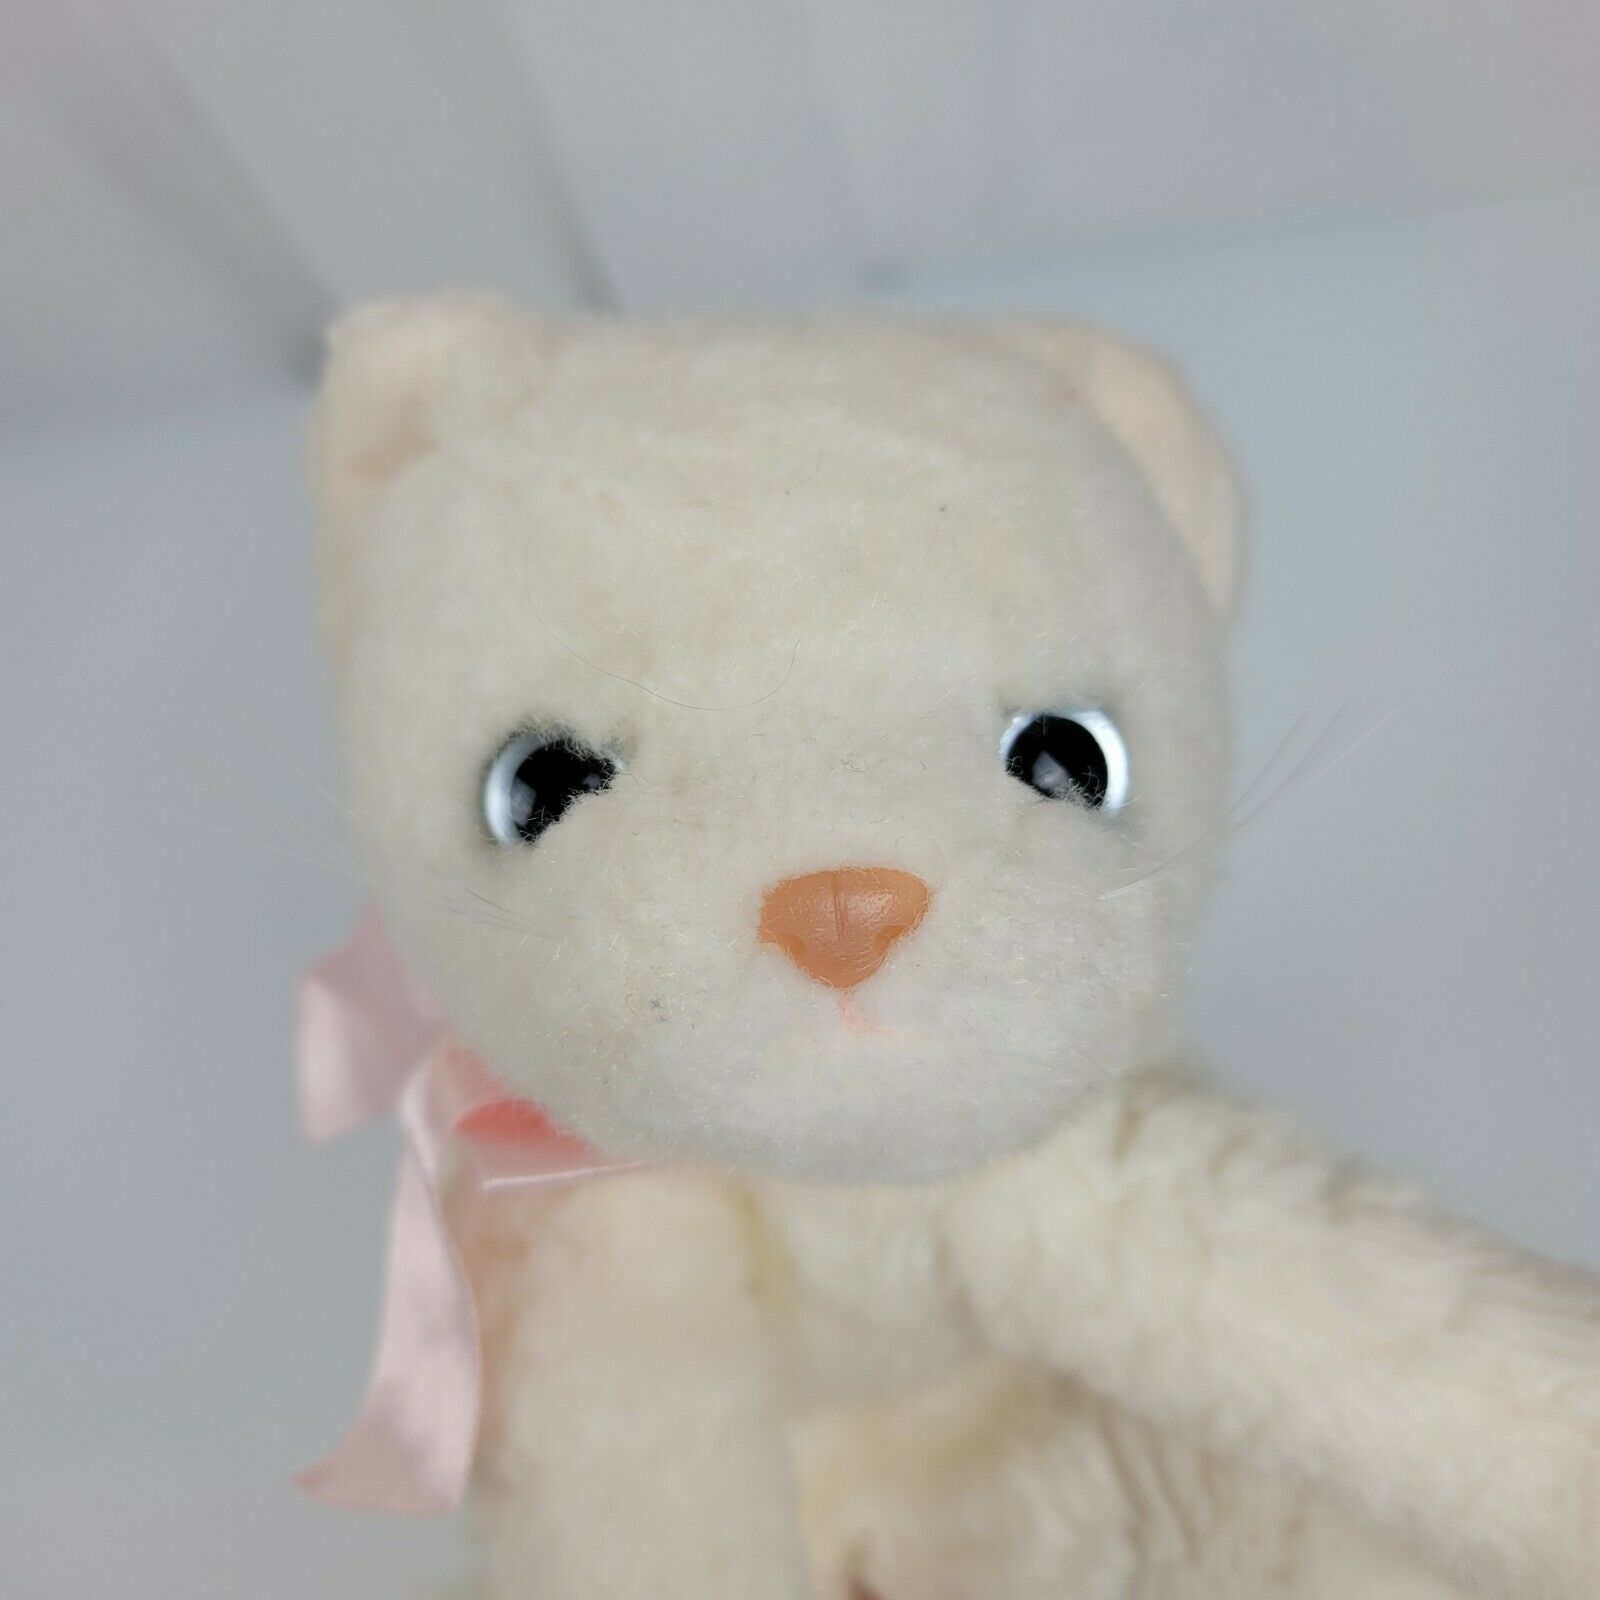 Ty Classic Sugar Cat Plush Soft Fluffy White Persian Kitty Heart Tag 2002 Beanie for sale online 